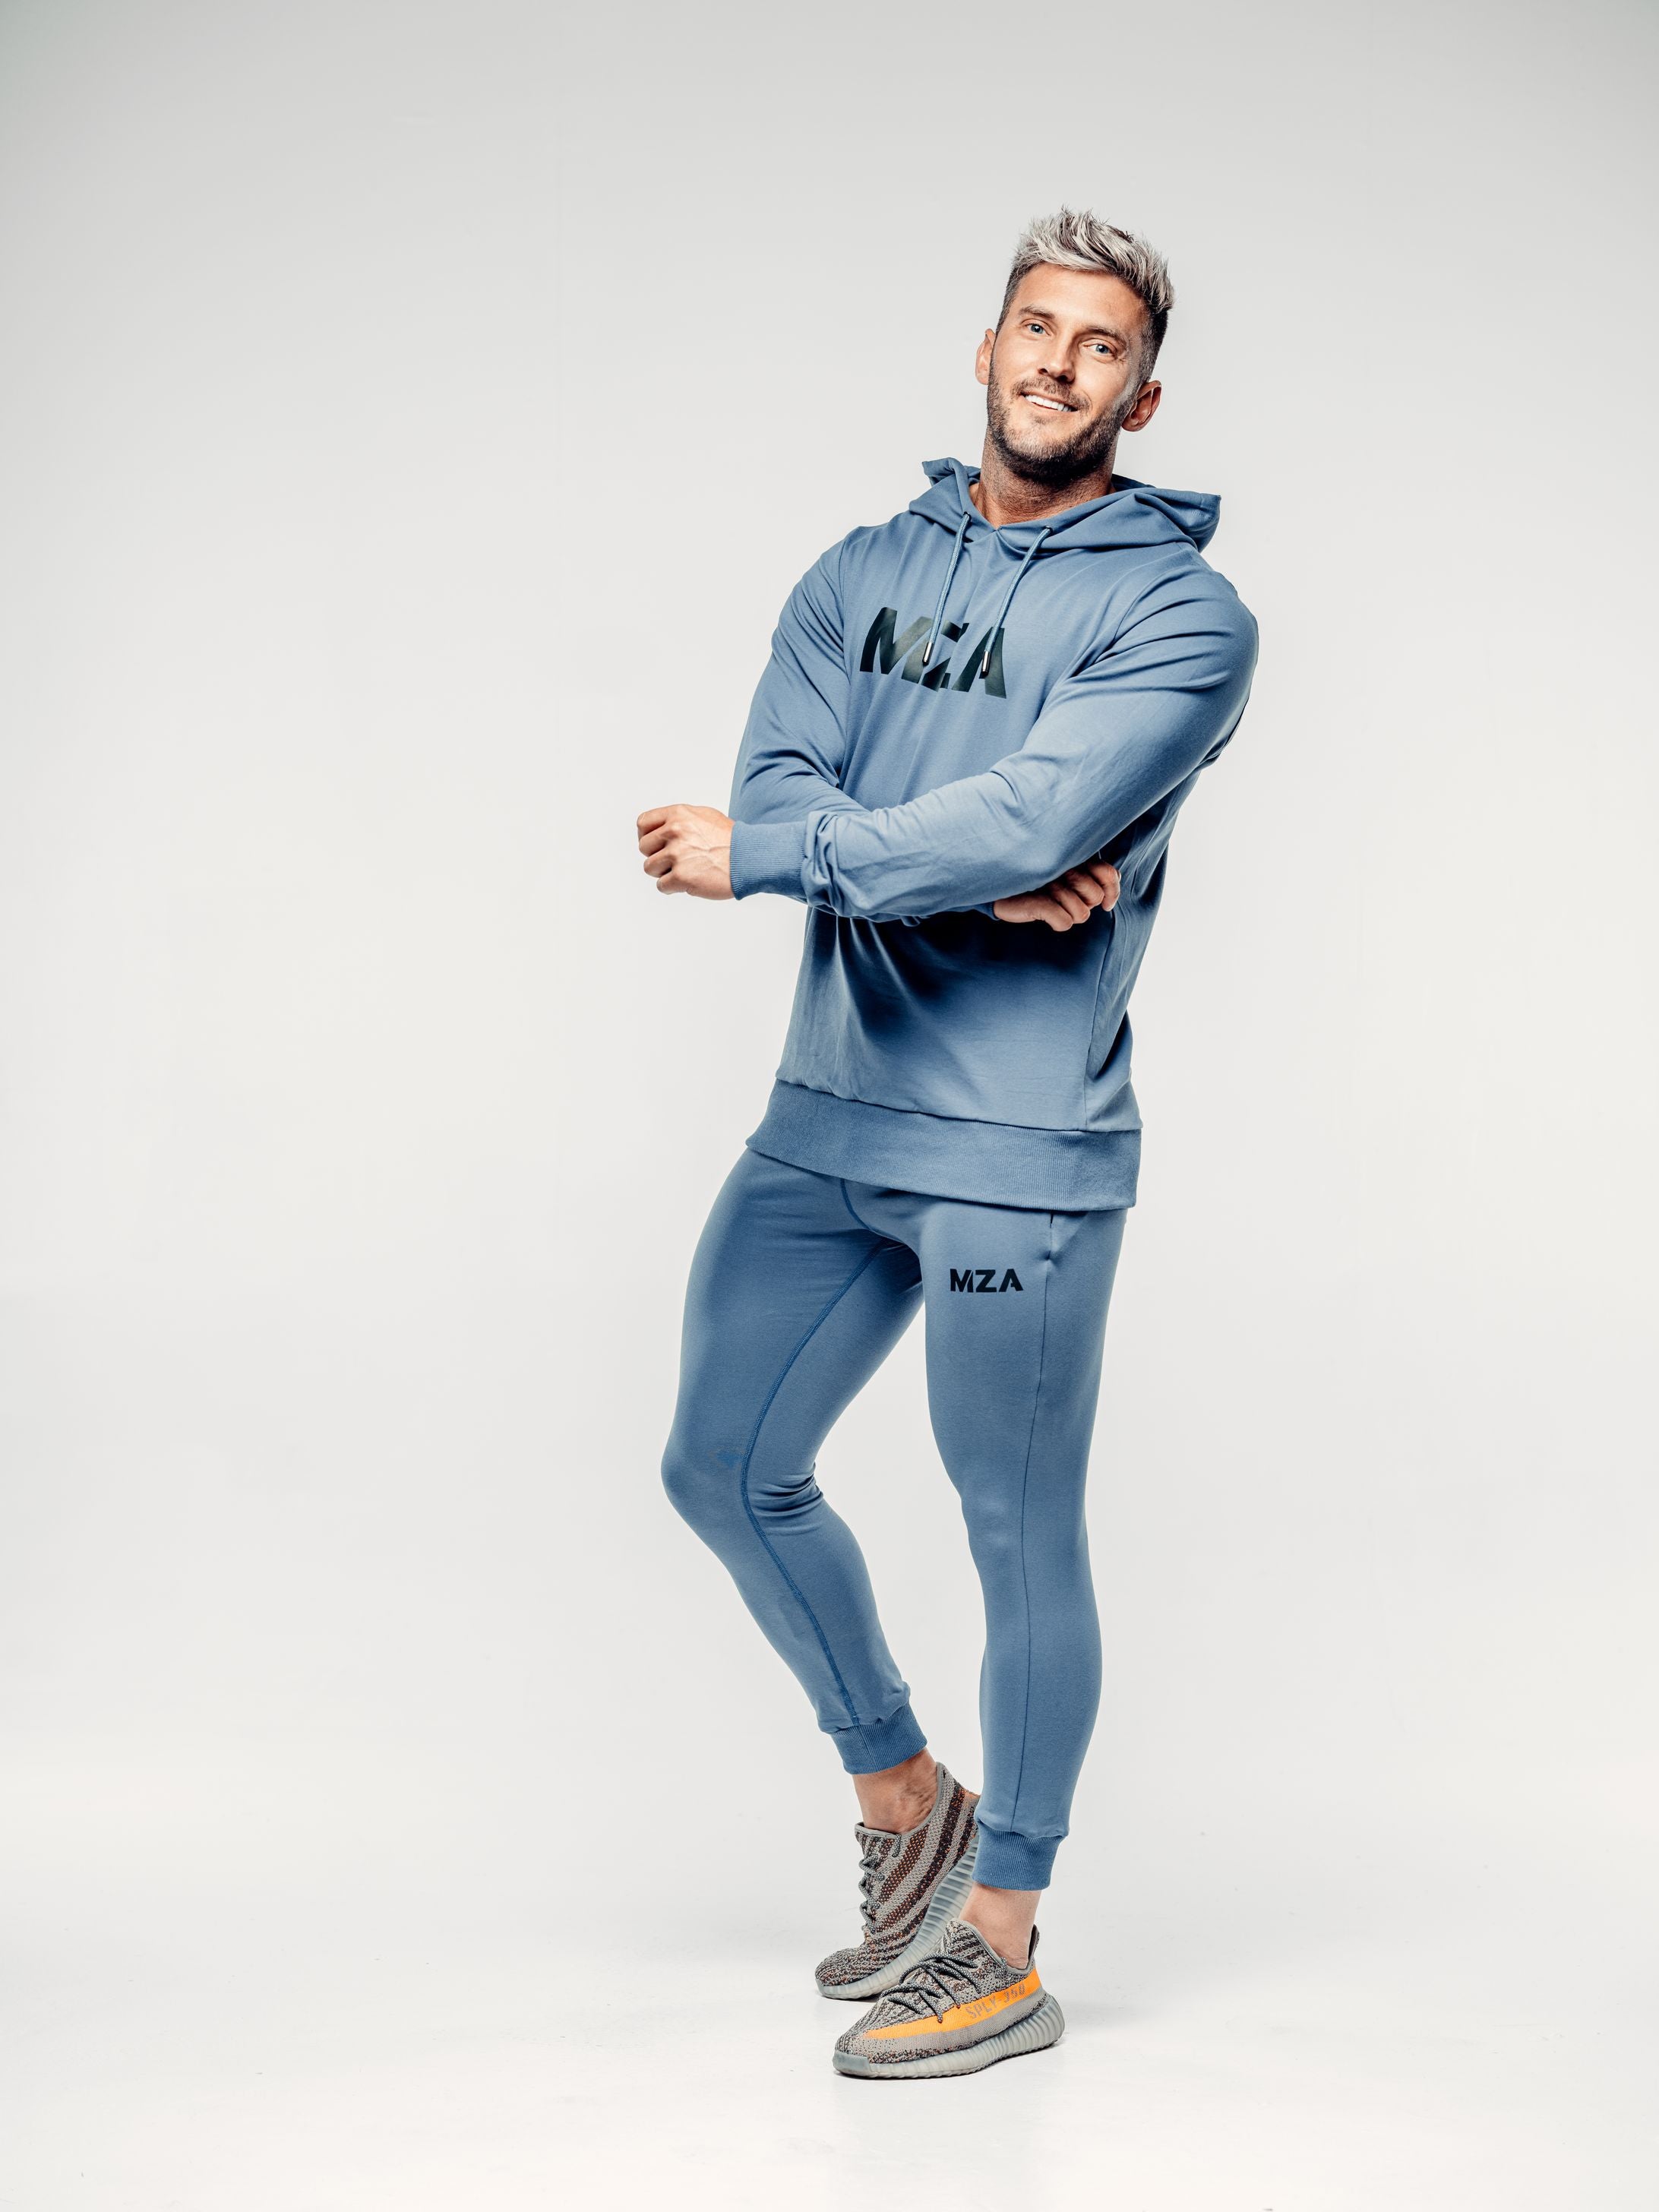 This is Shane wearing the New standard hoodie and new standard joggers combo in blue steel.  Shane has his arms crossed and is smiling.